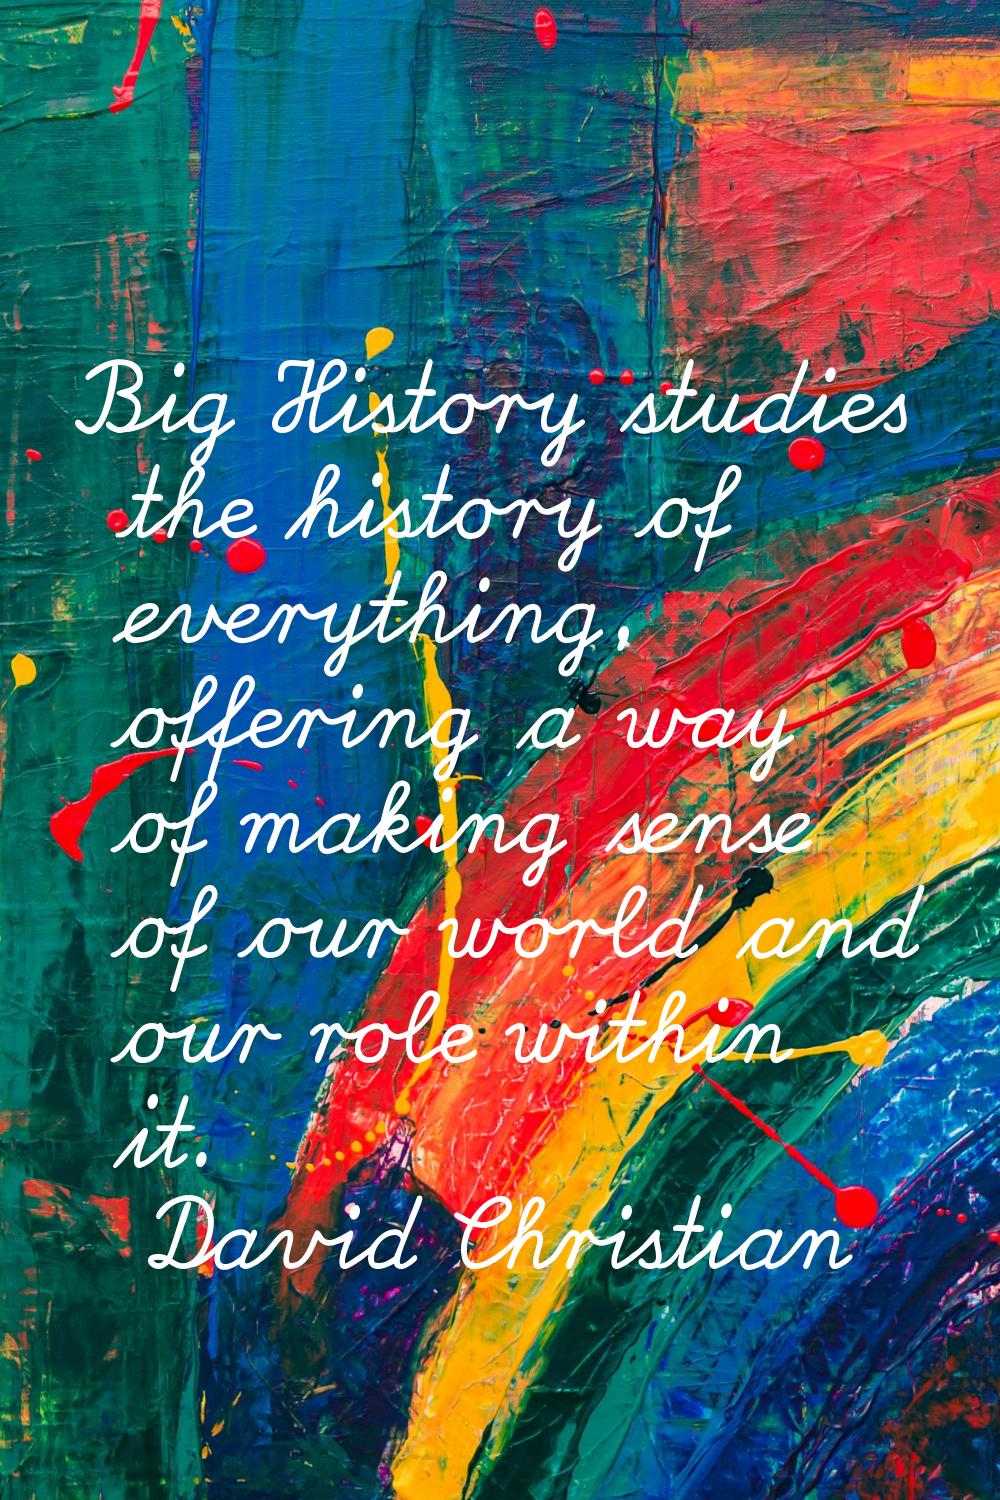 Big History studies the history of everything, offering a way of making sense of our world and our 